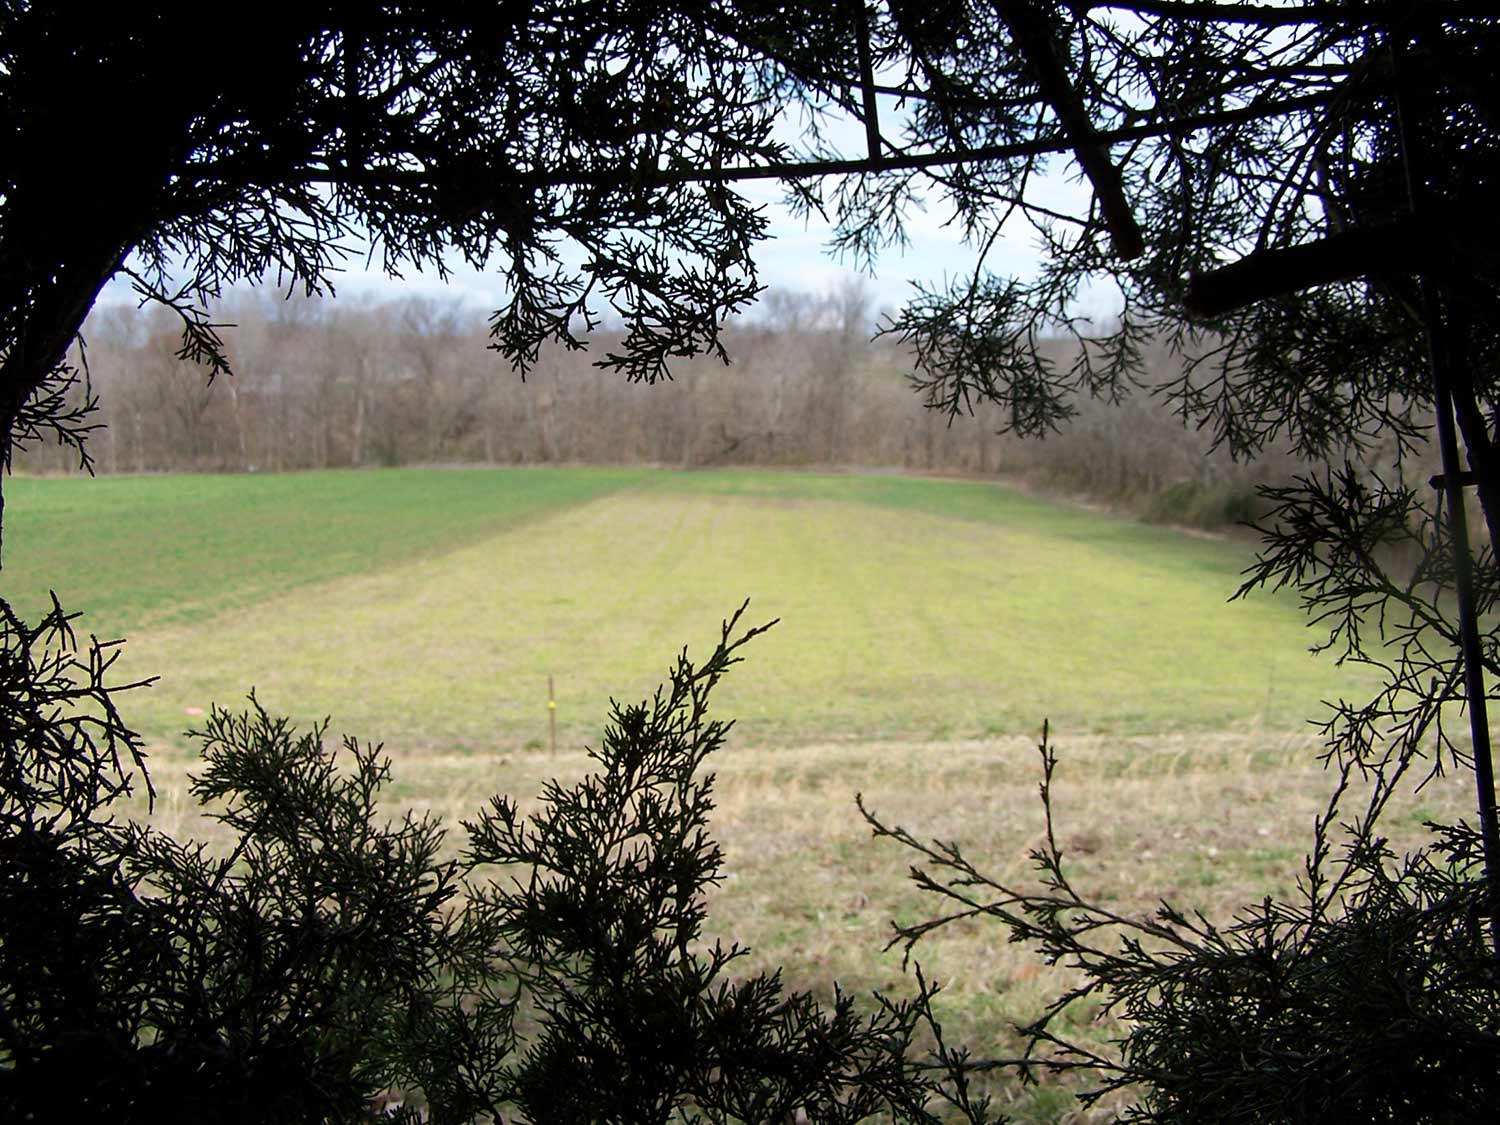 A large food plot and open field.